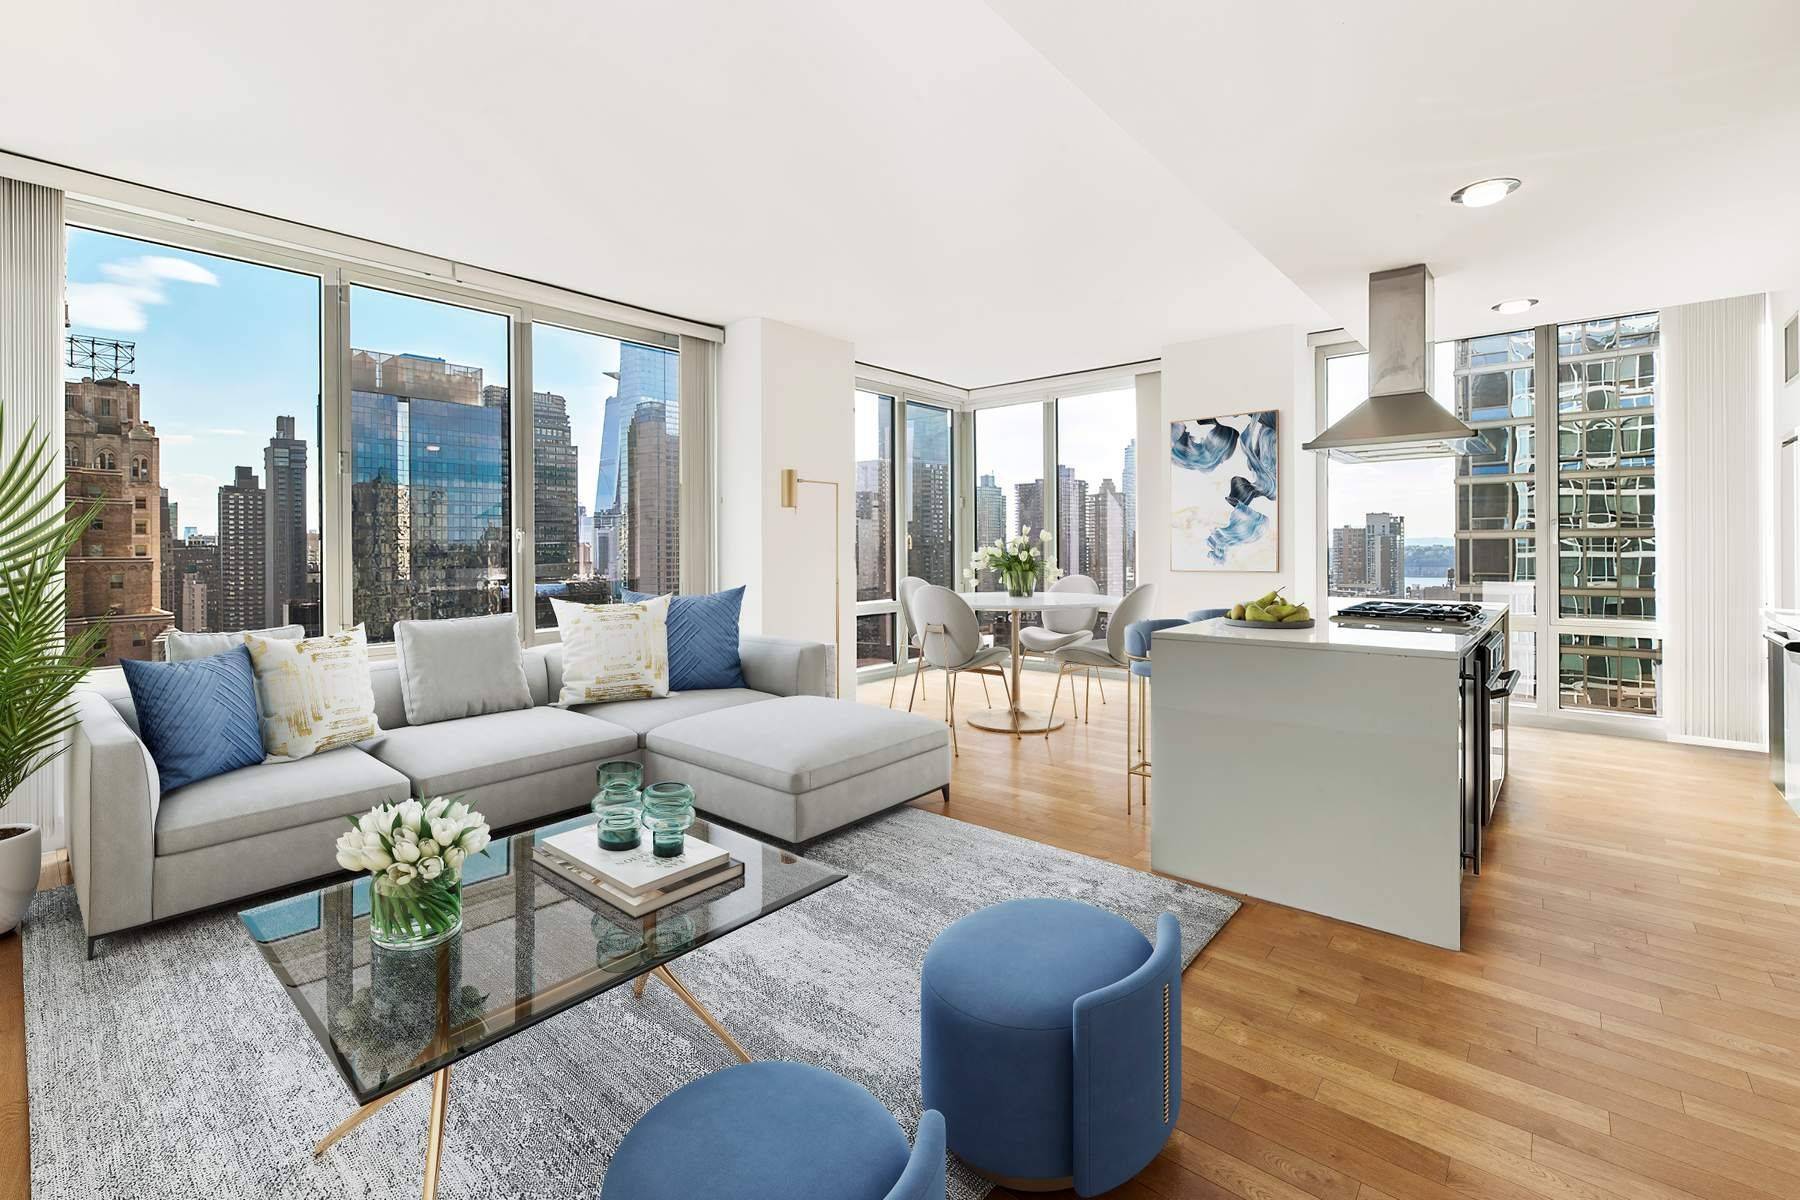 Located in the heart of Midtown Manhattan, Residence 2303 at the Platinum at 247 West 46th Street, is a spacious 2 Bedroom, 2.